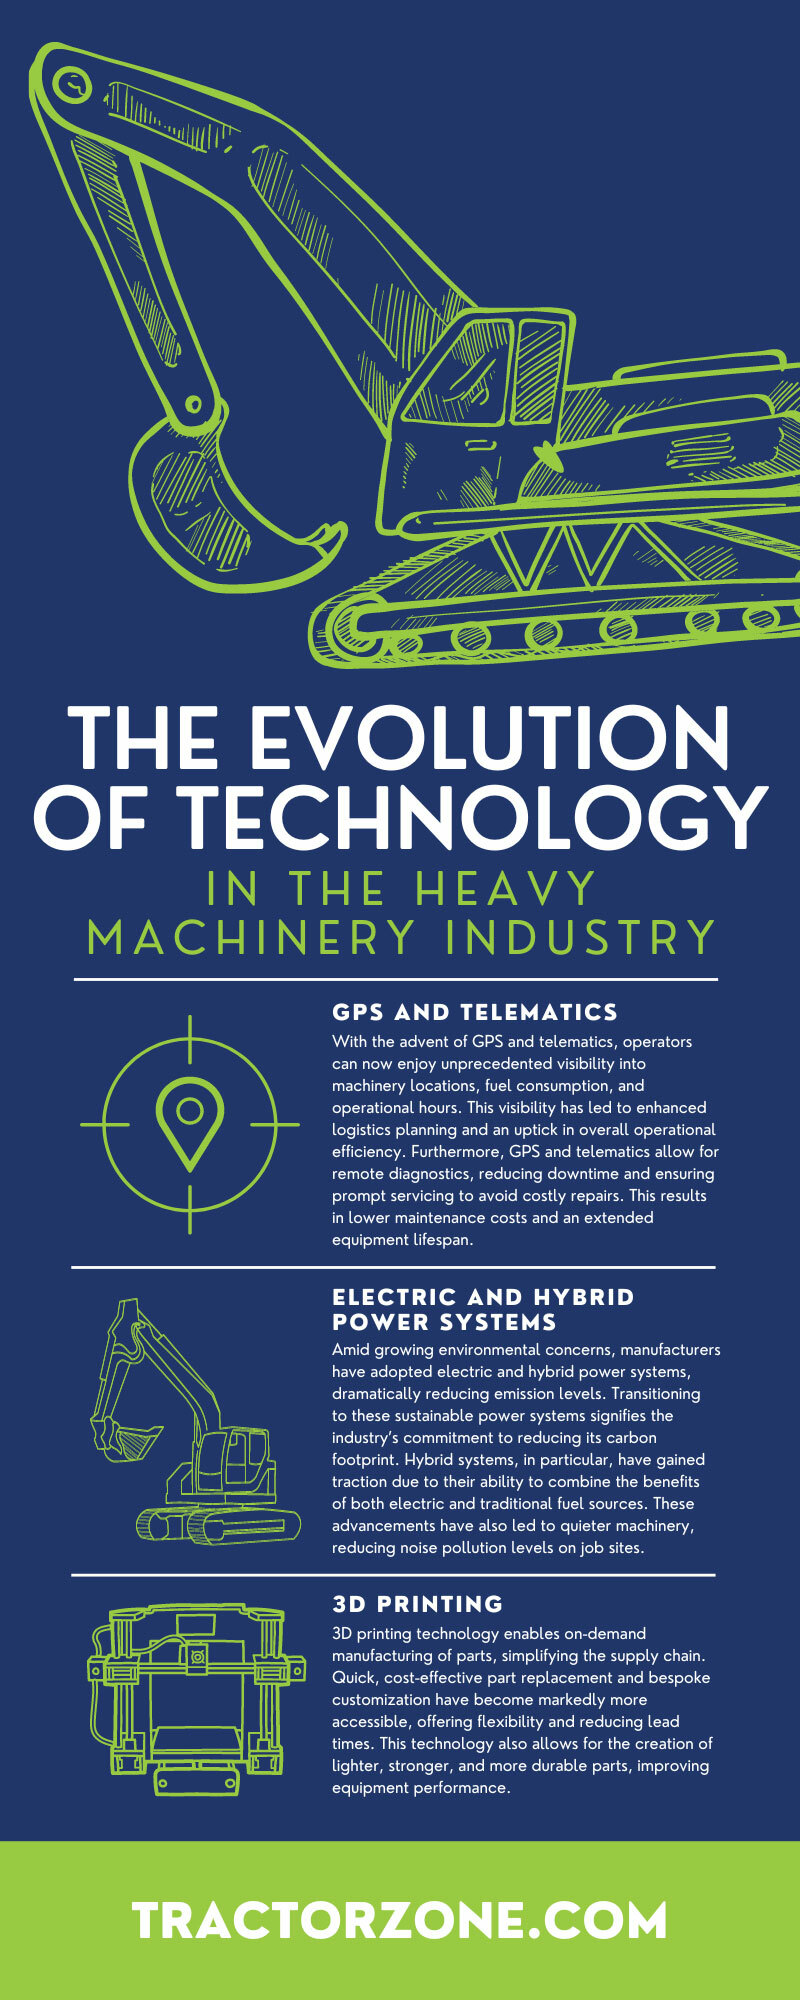 The Evolution of Technology in the Heavy Machinery Industry
